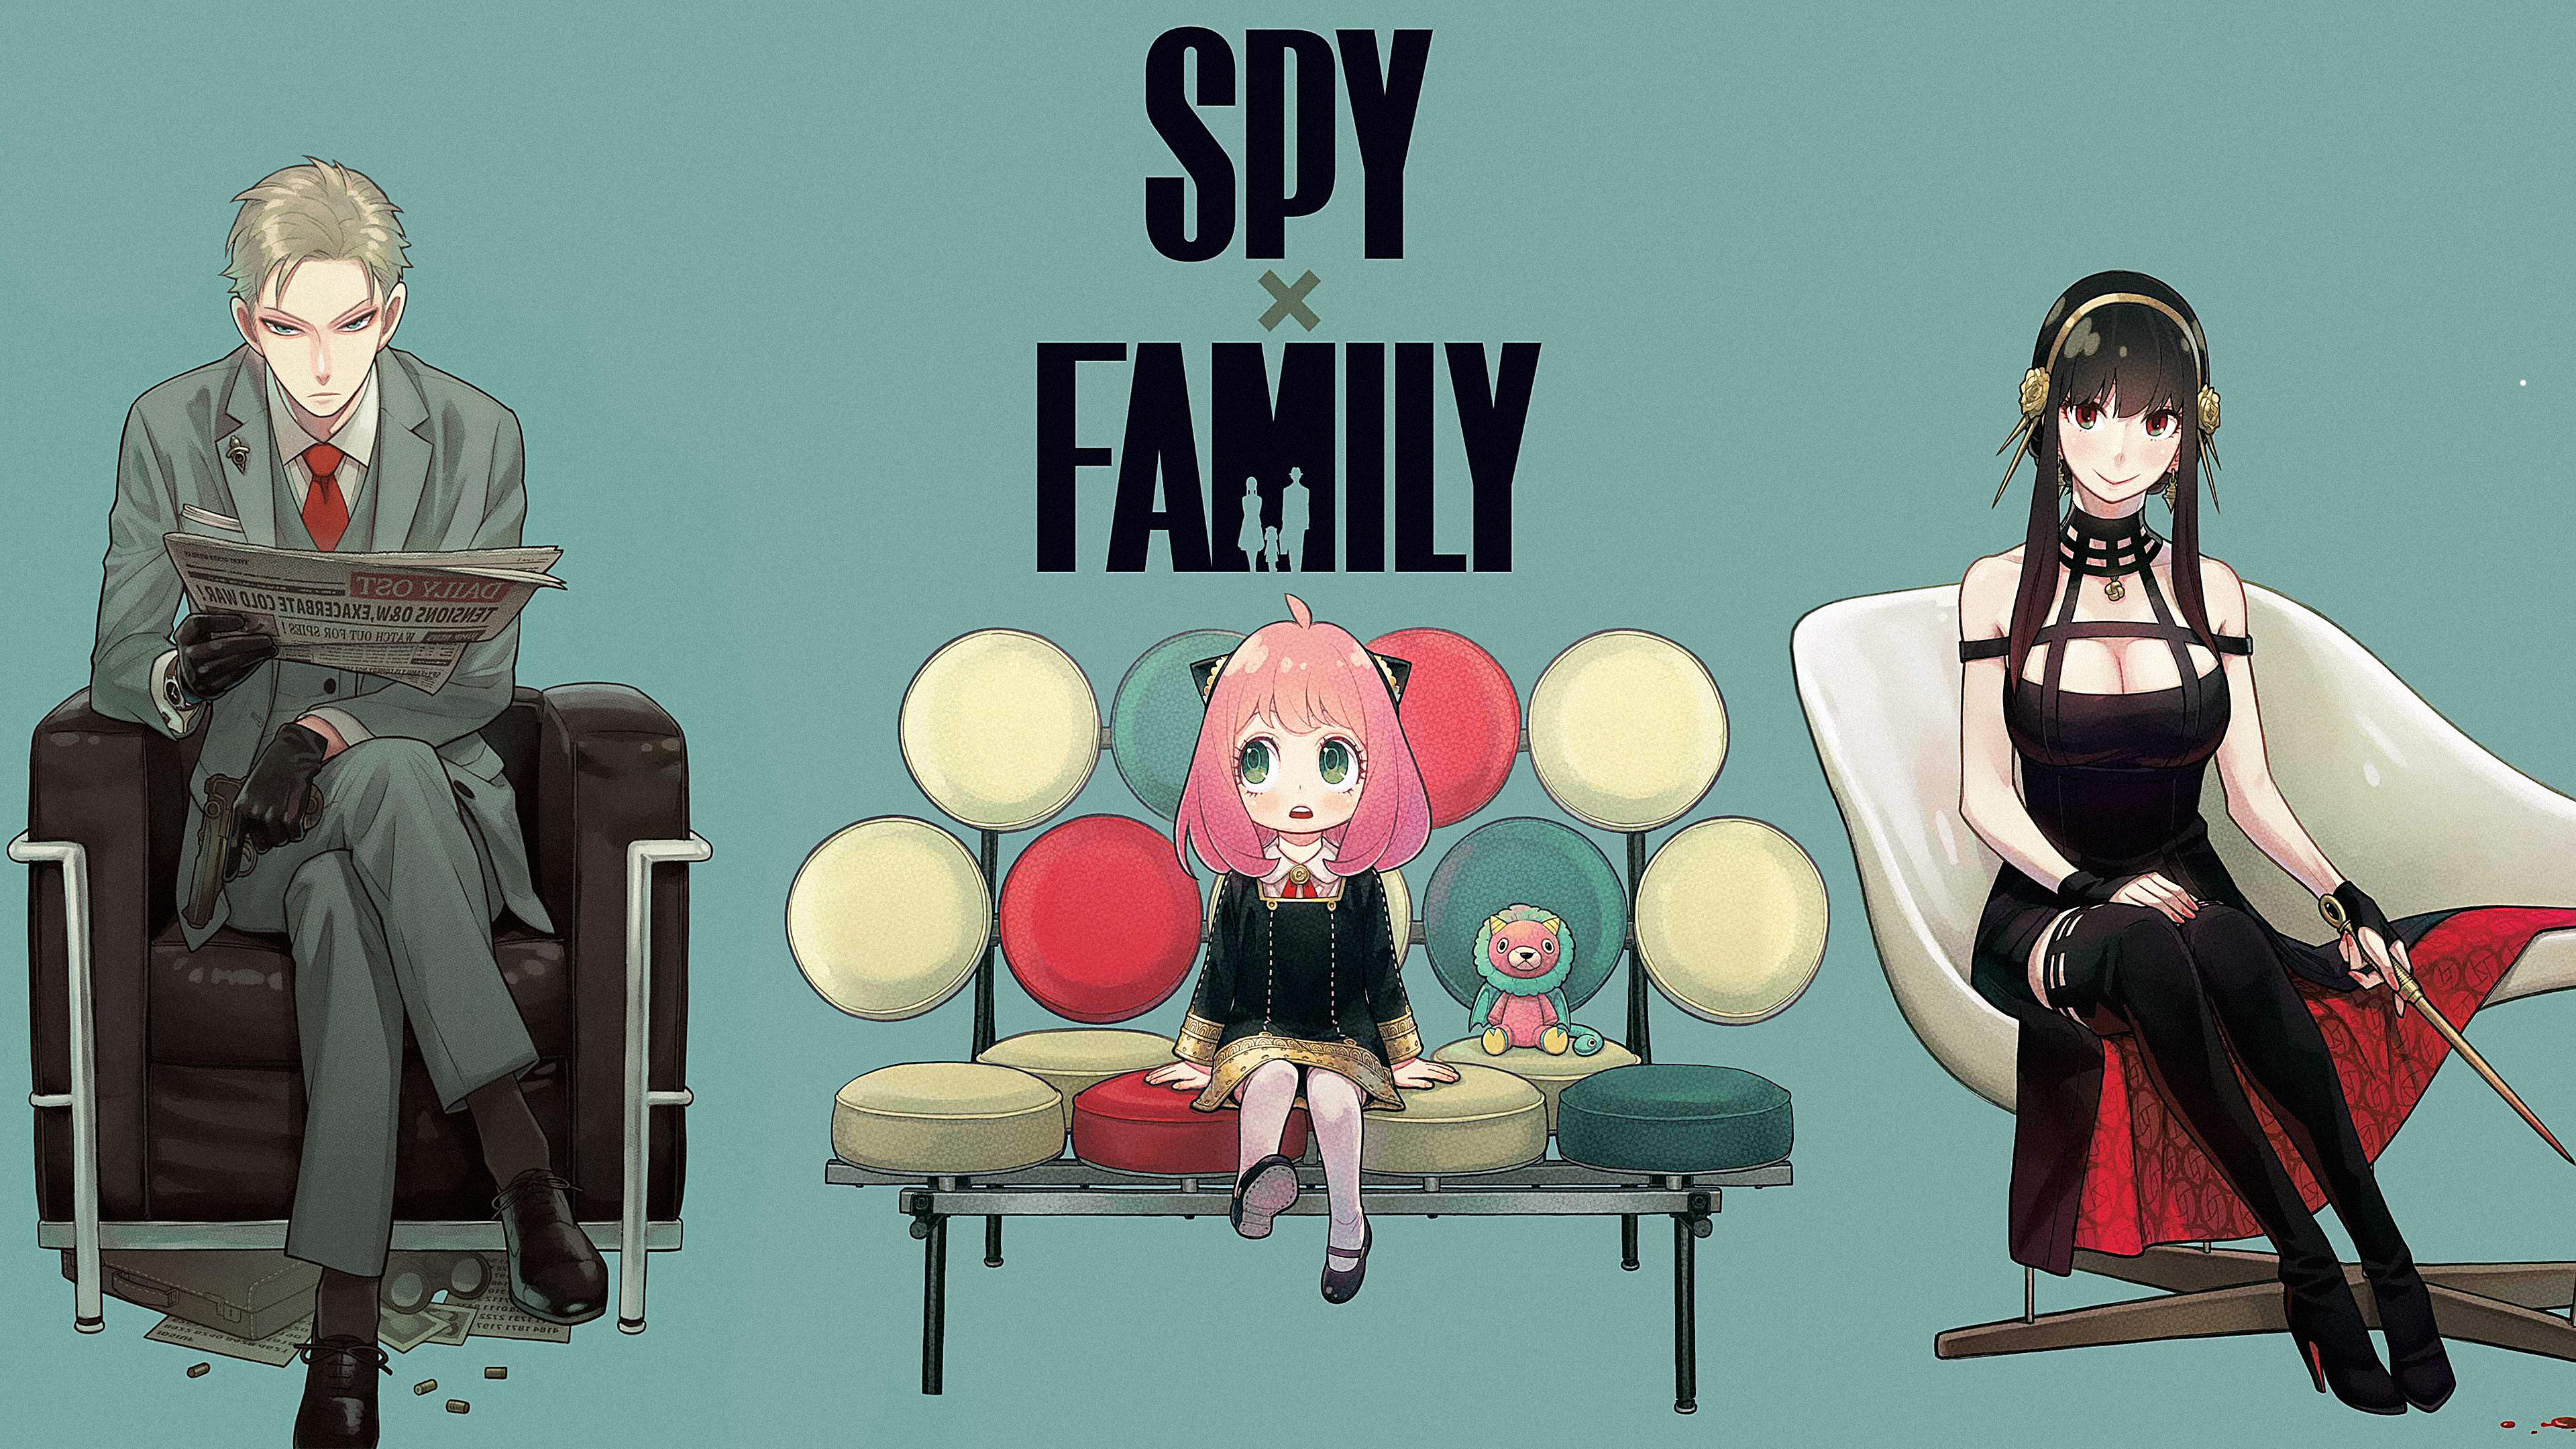 1200+ Spy x Family HD Wallpapers and Backgrounds